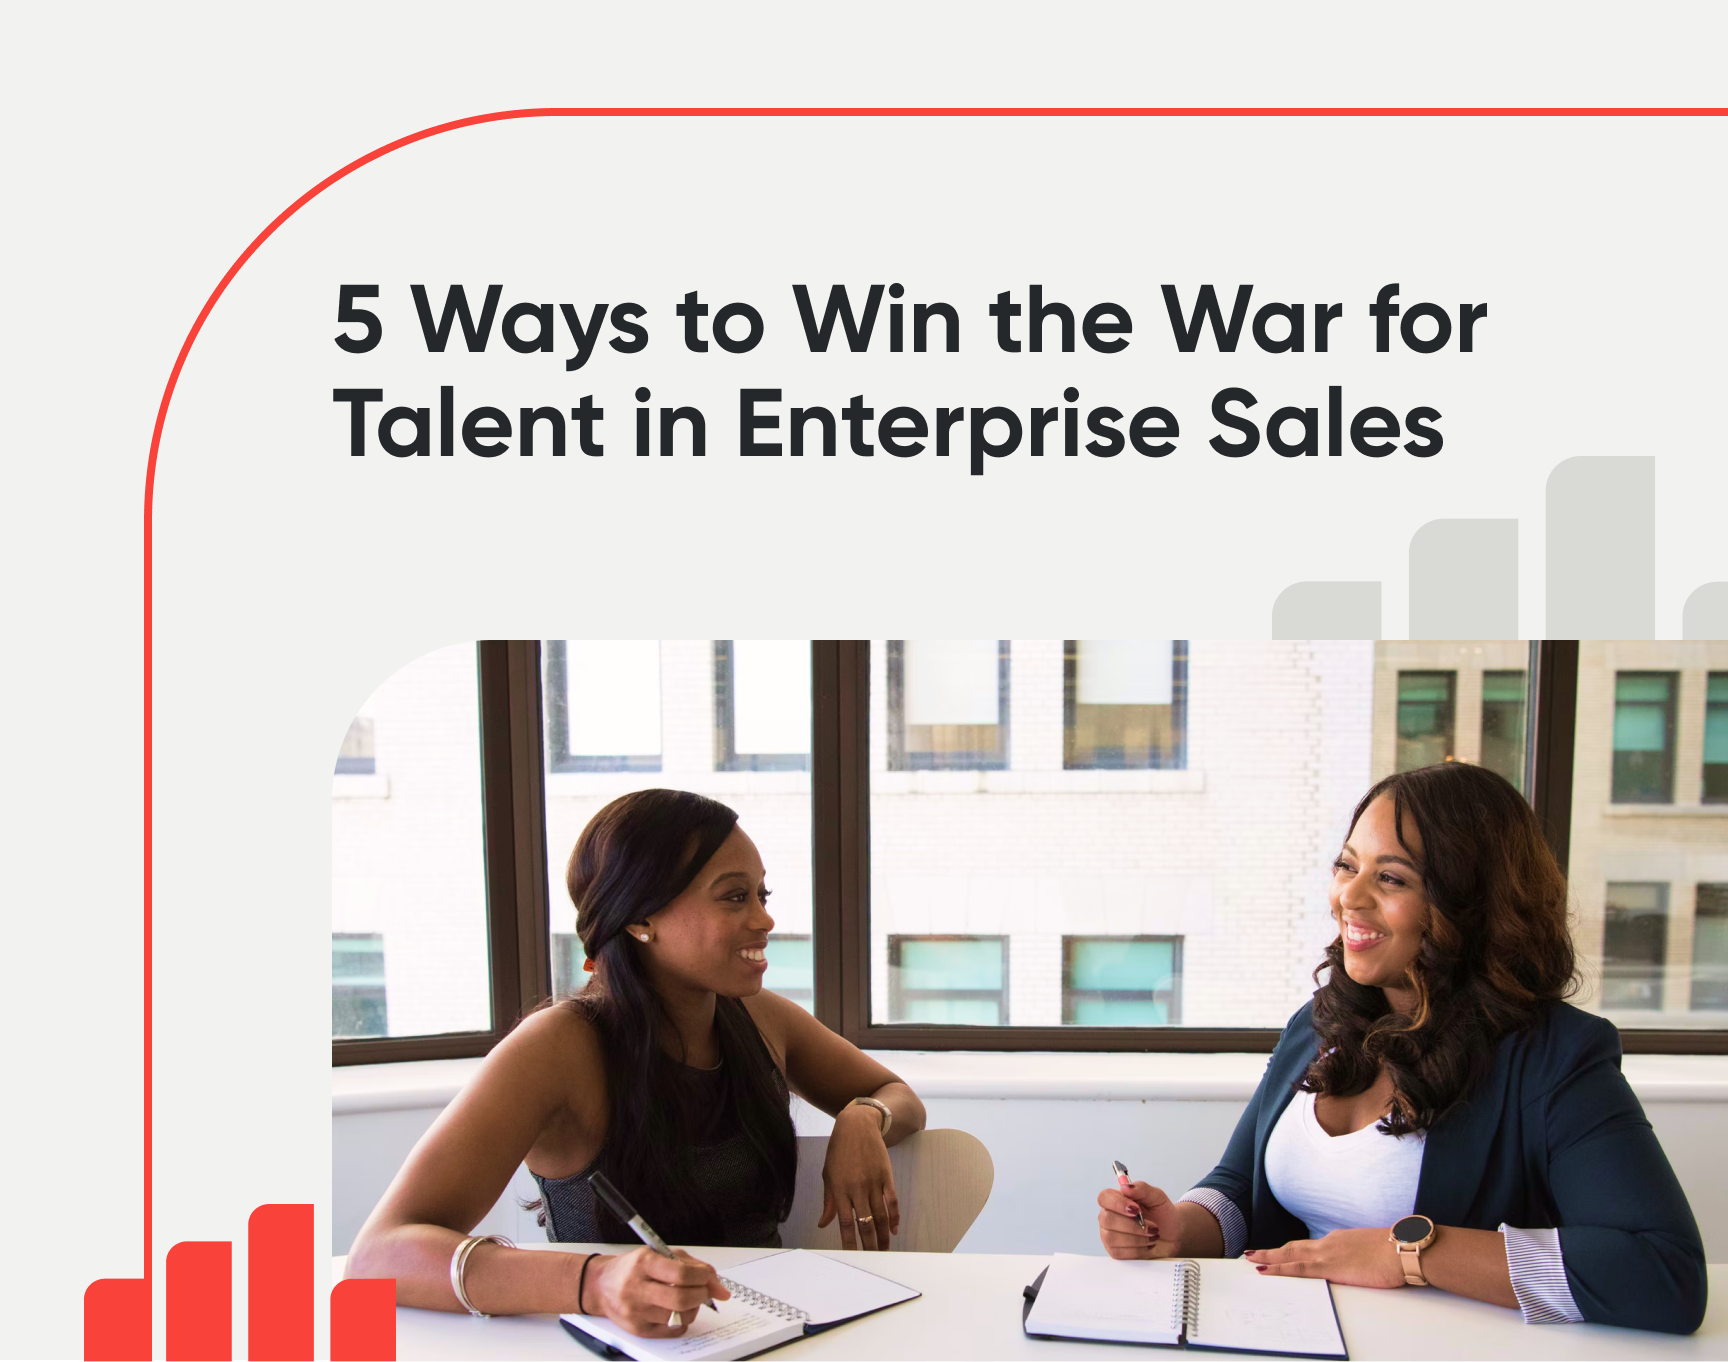 5 Ways to Win the War for Talent in Enterprise Sales